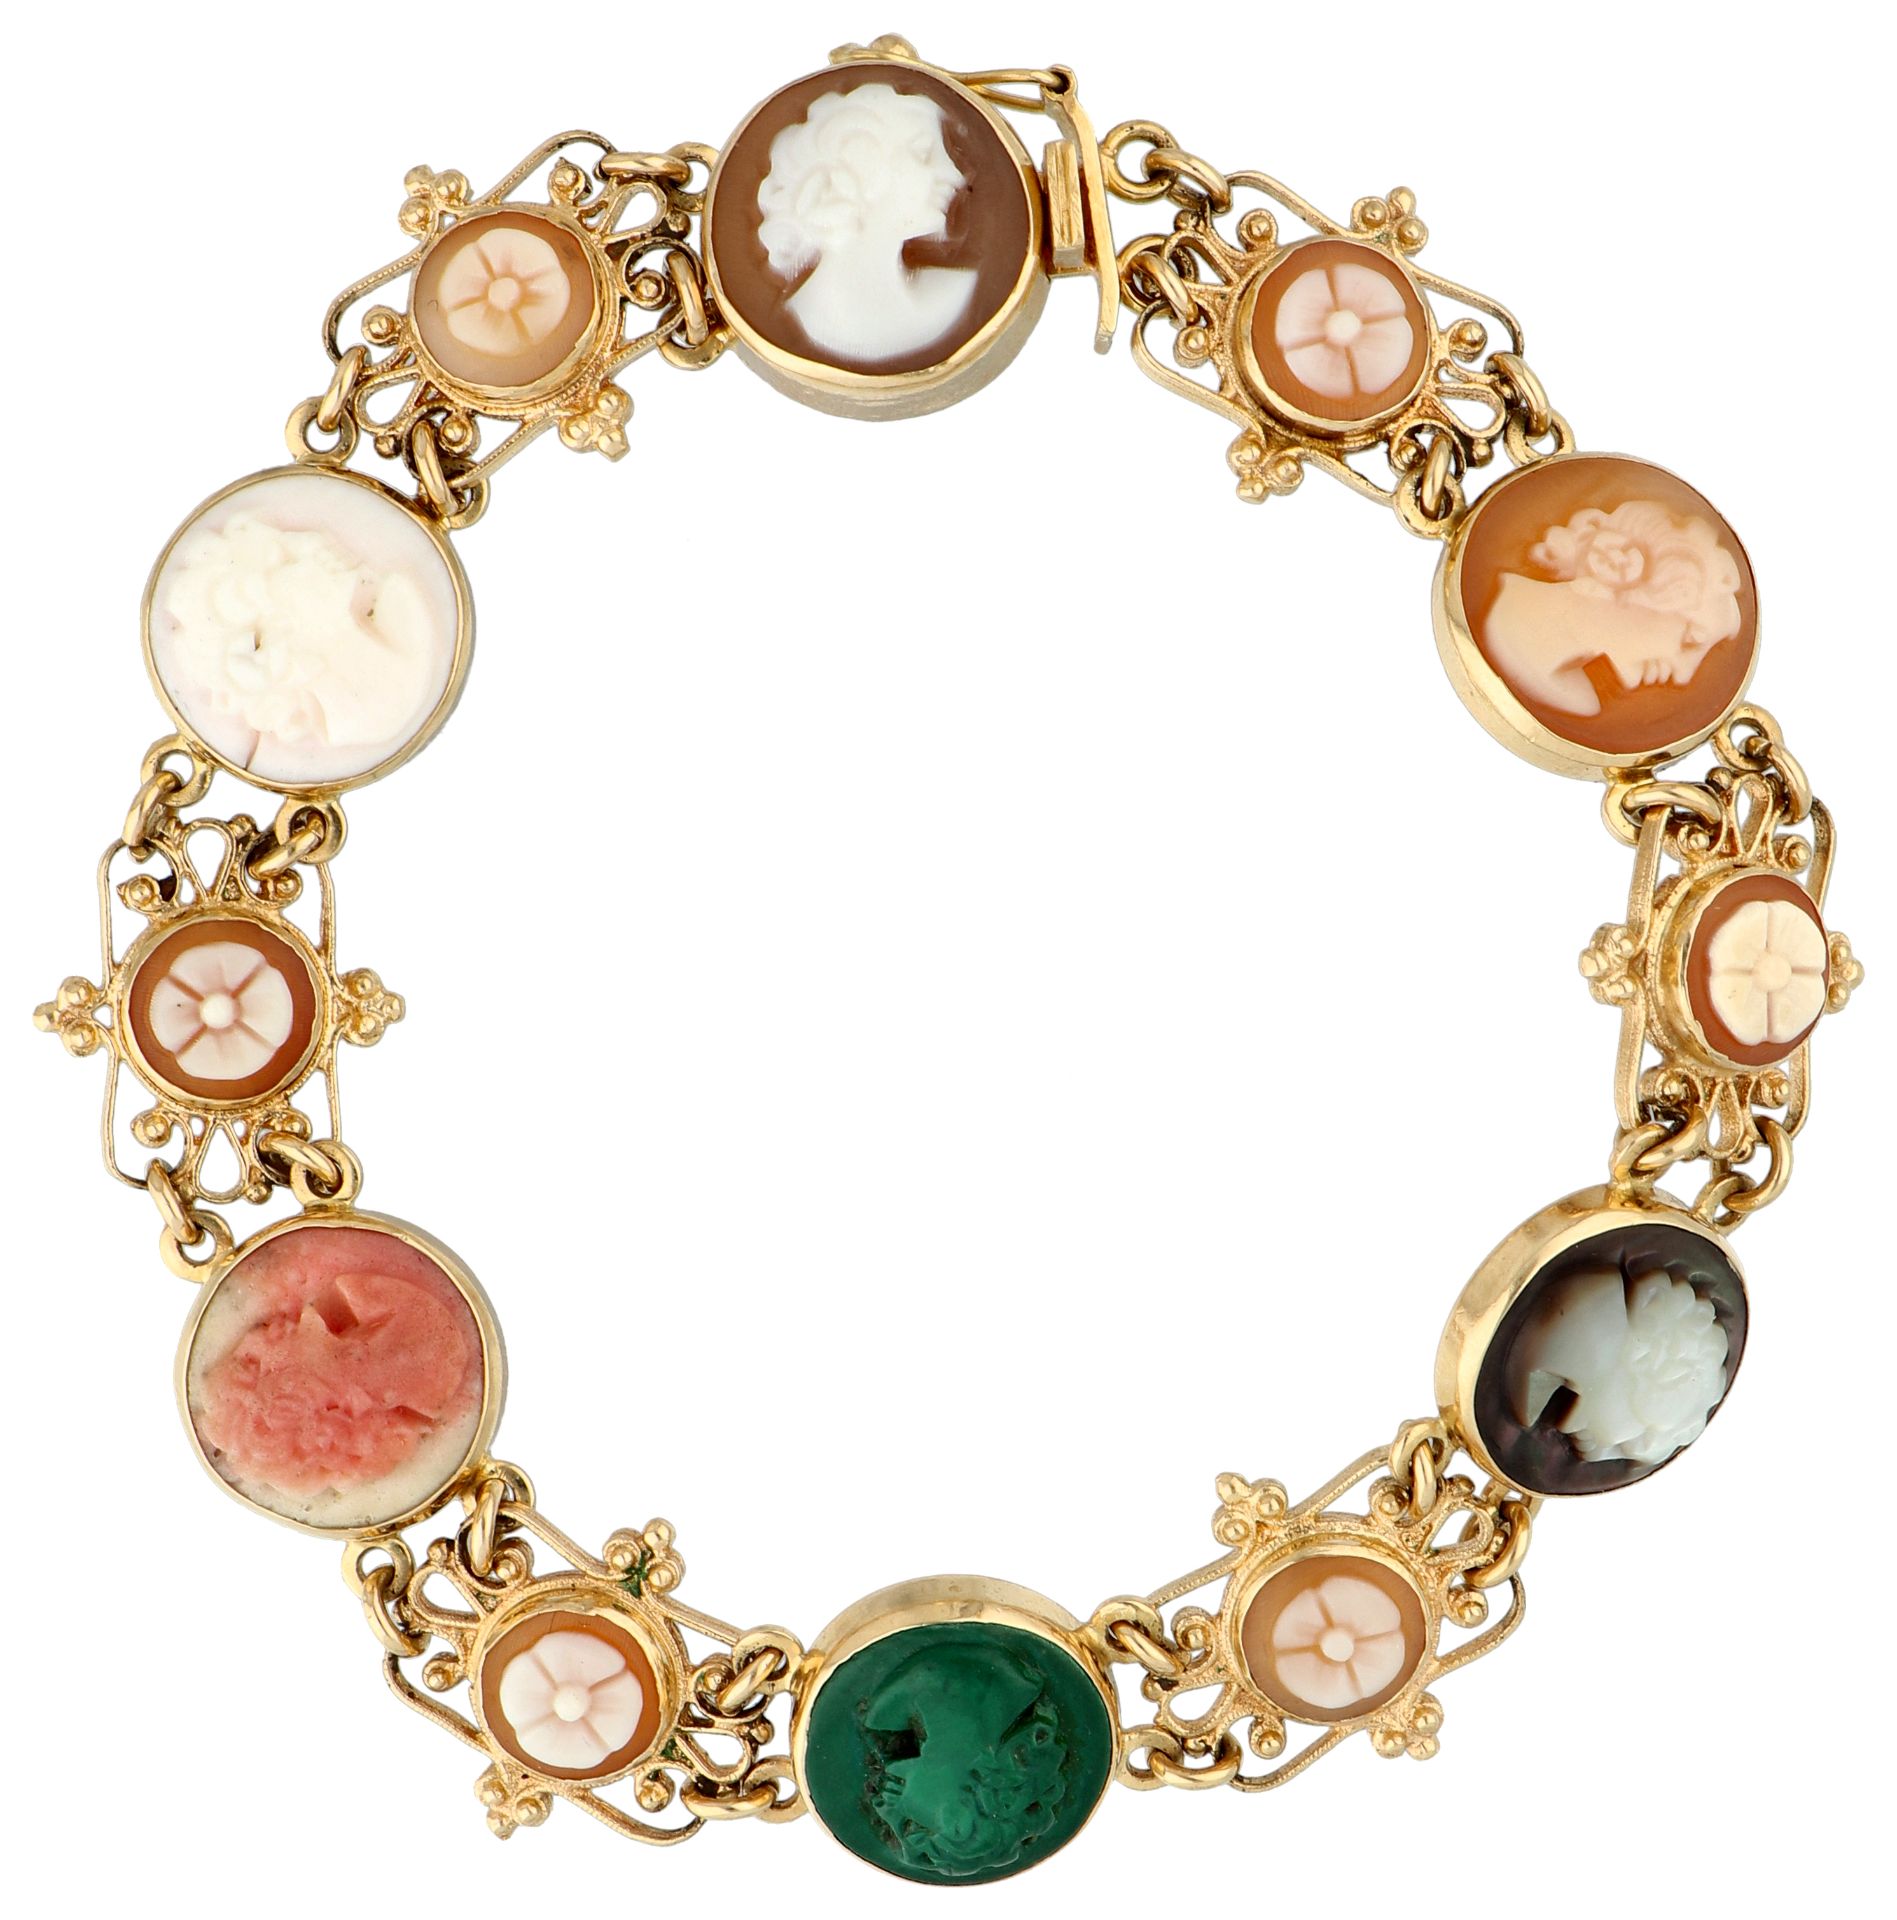 No reserve - 18K Yellow gold vintage bracelet set with various cameos from the Italian jewelry brand